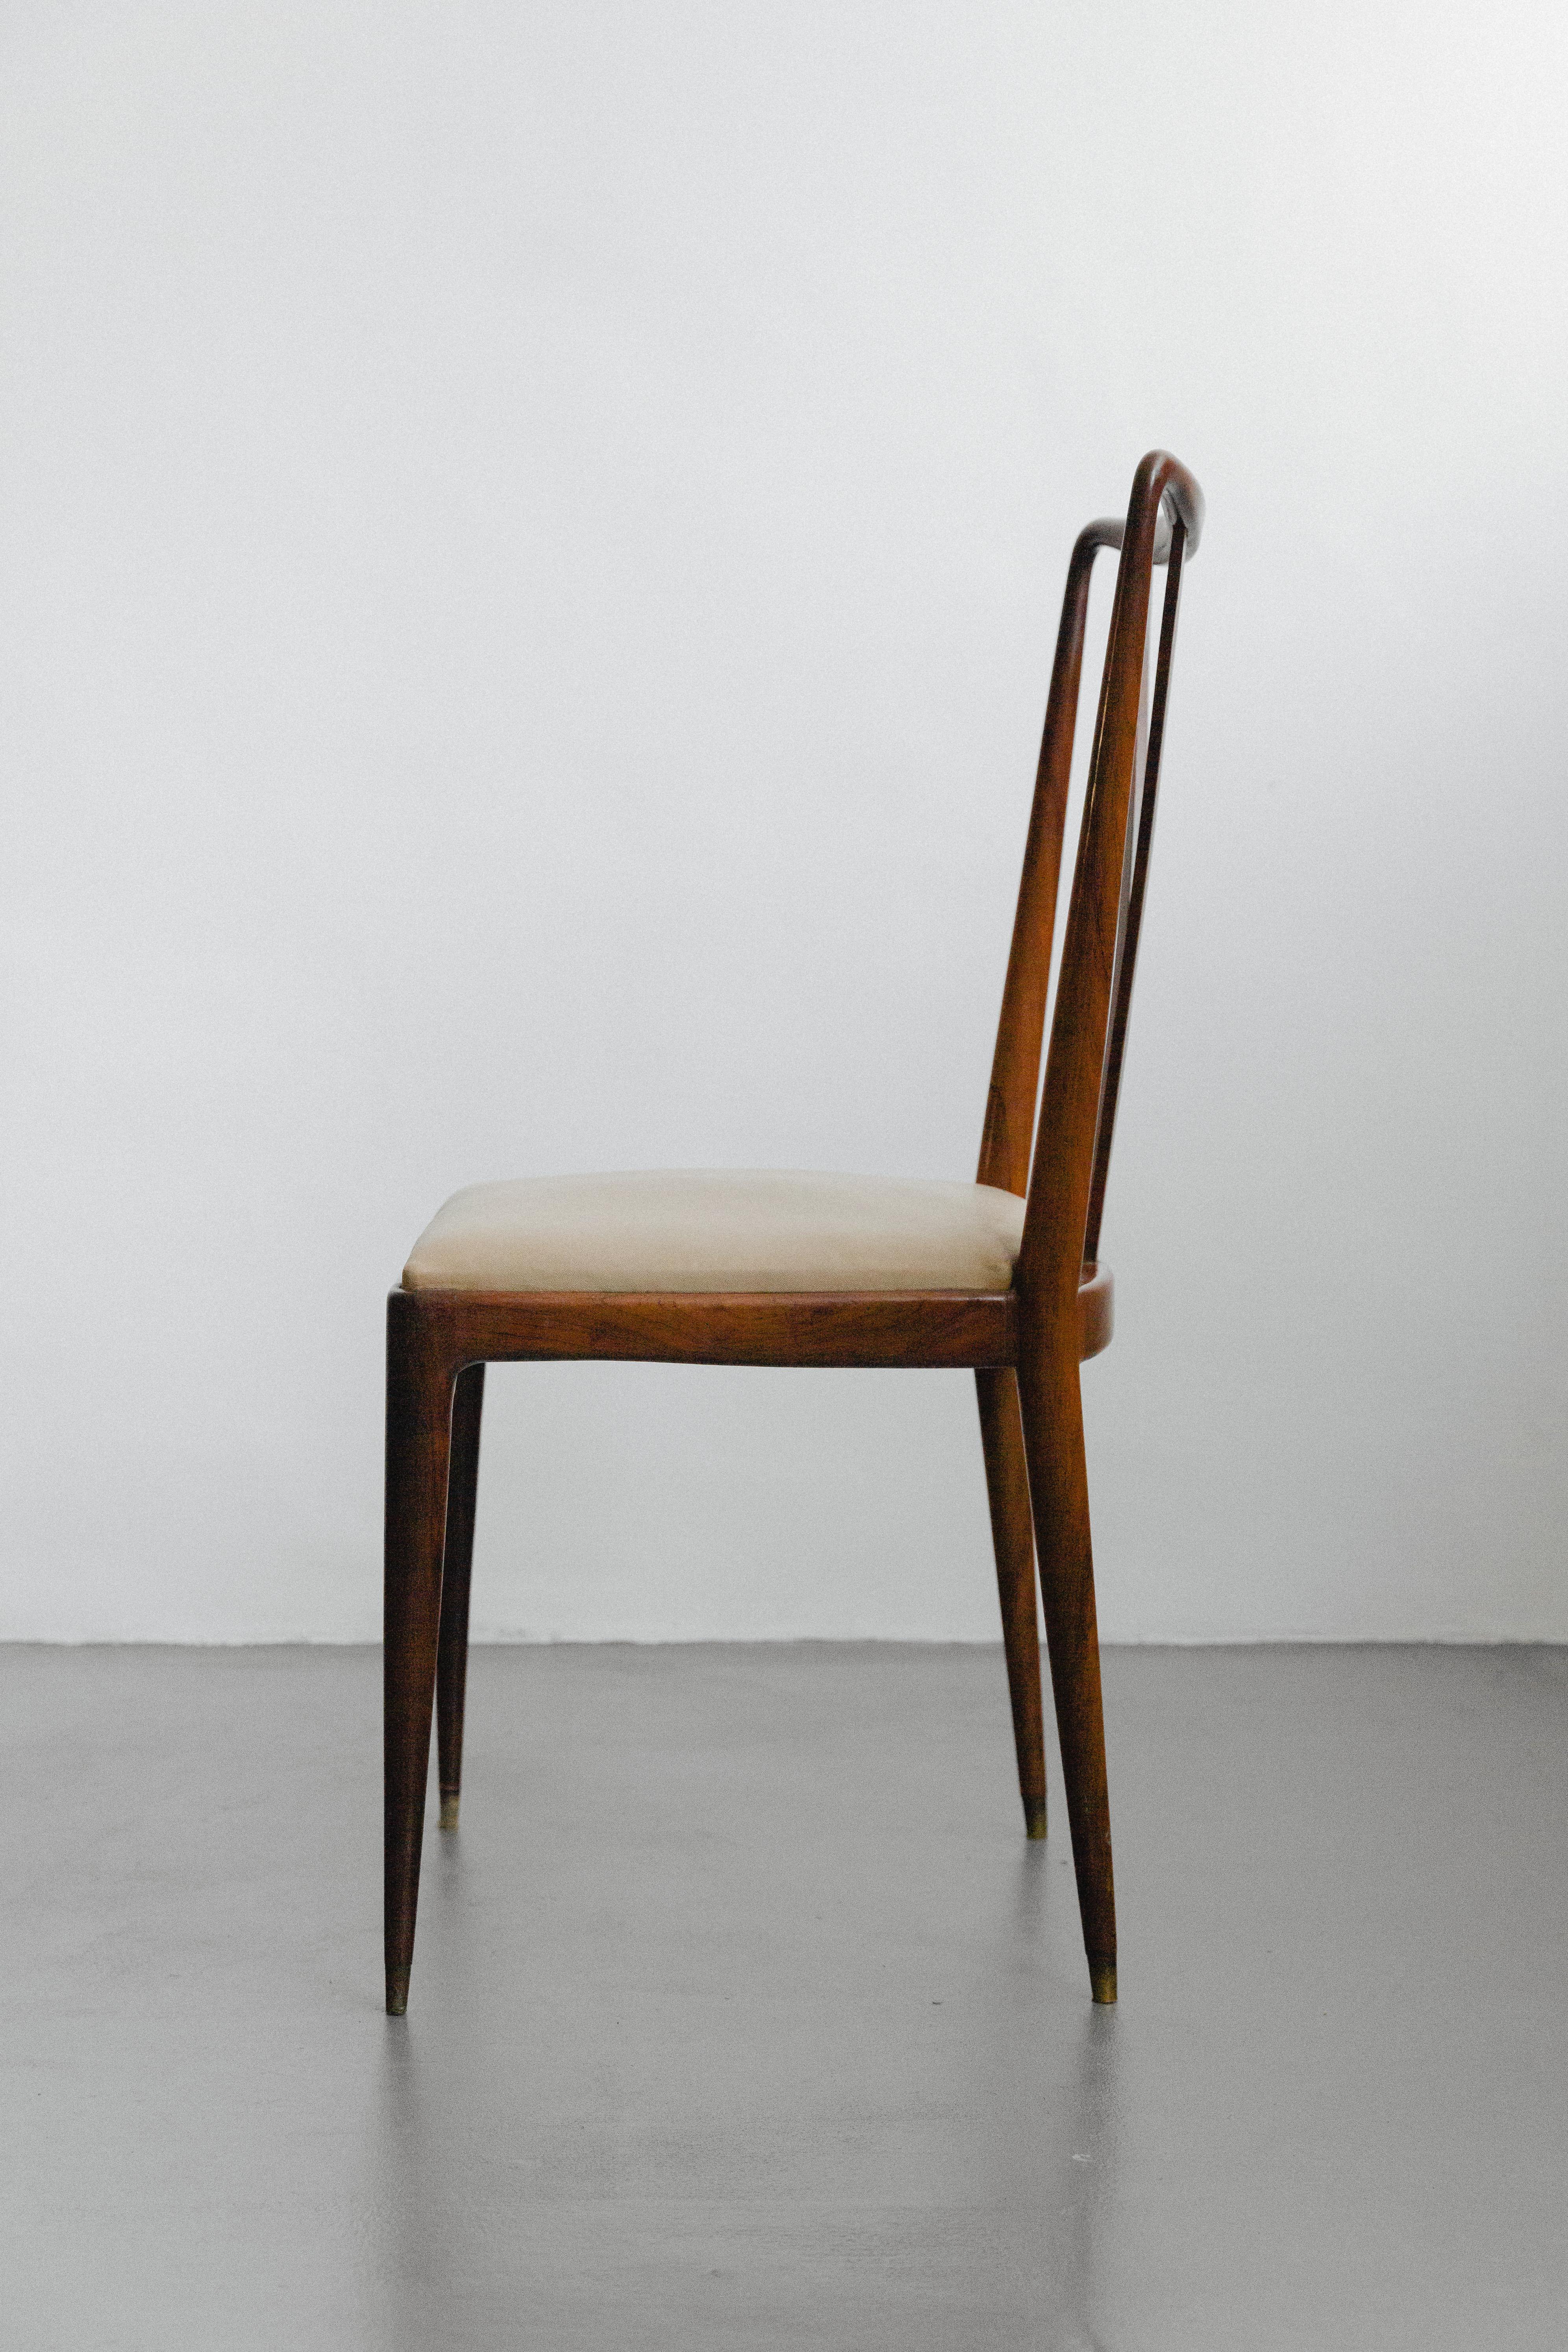 20th Century Rosewood Dining Chair, Giuseppe Scapinelli, Brazilian Midcentury, 1950s